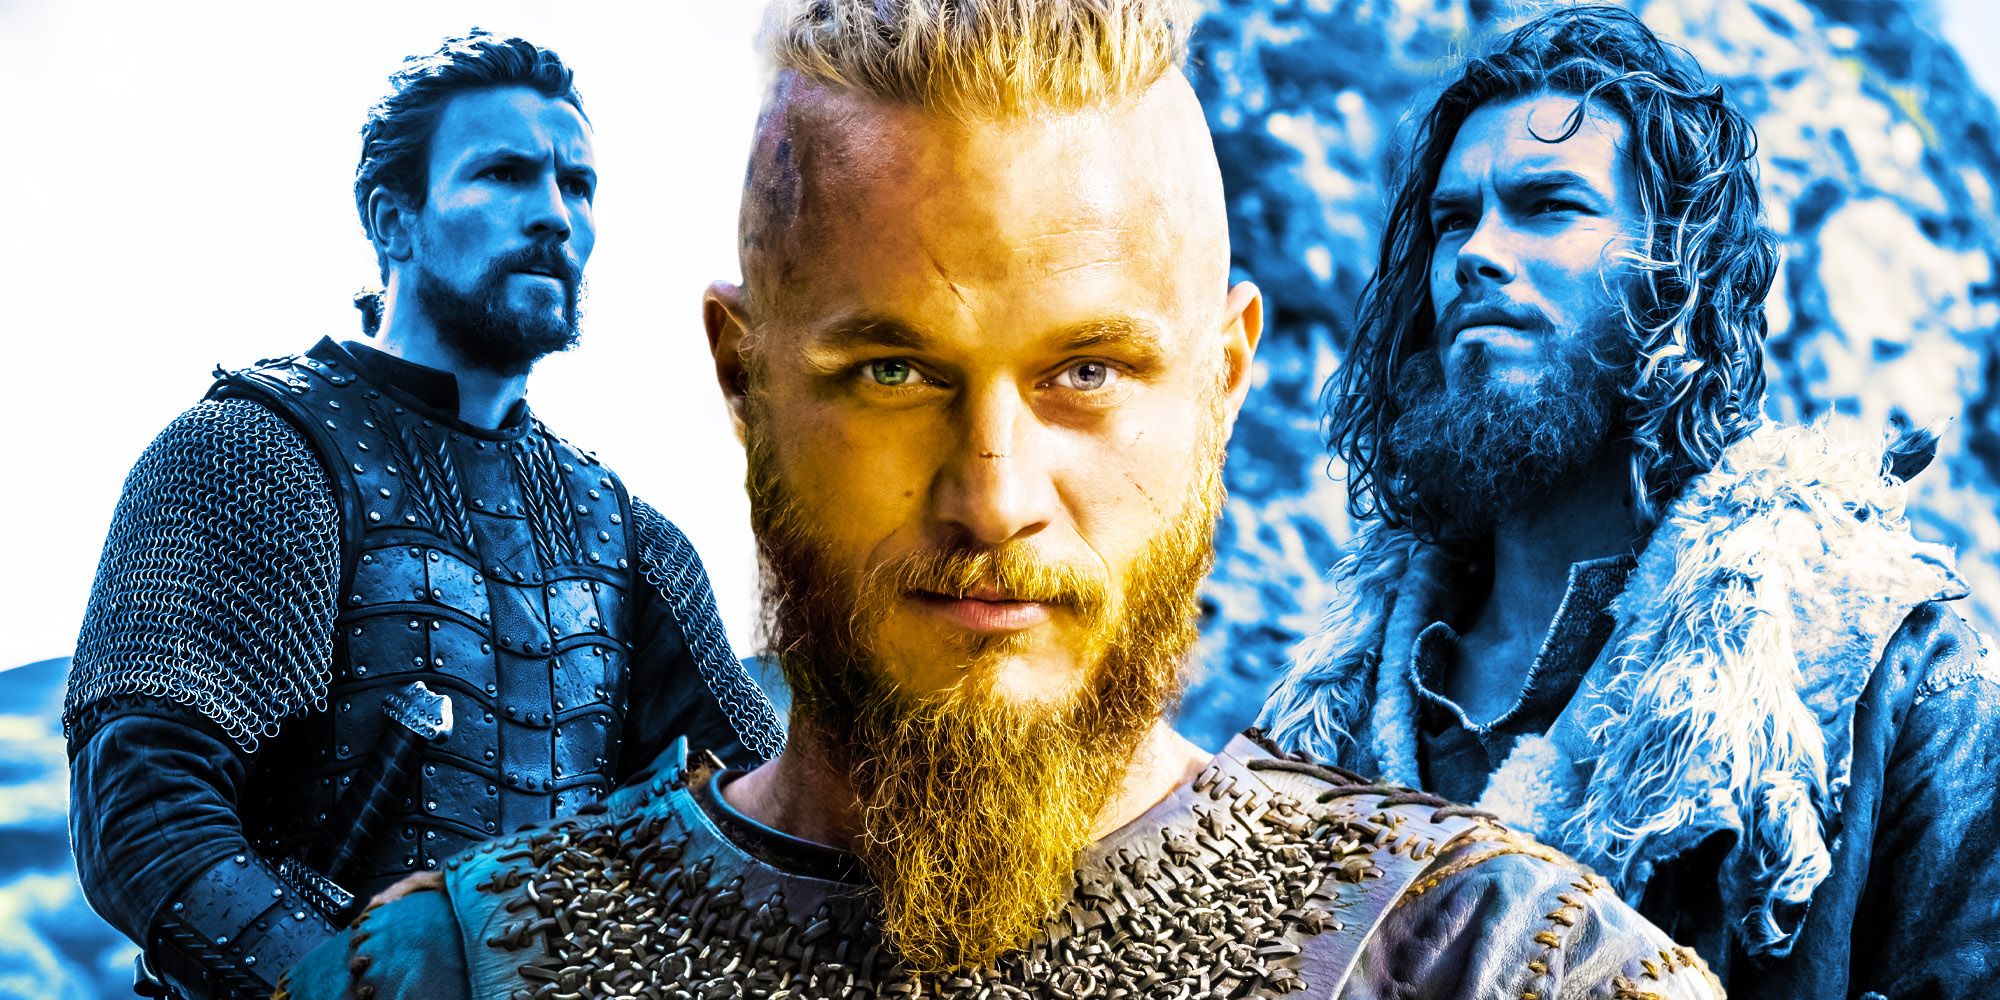 Here are the Vikings: Valhalla Characters Based on Real Vikings